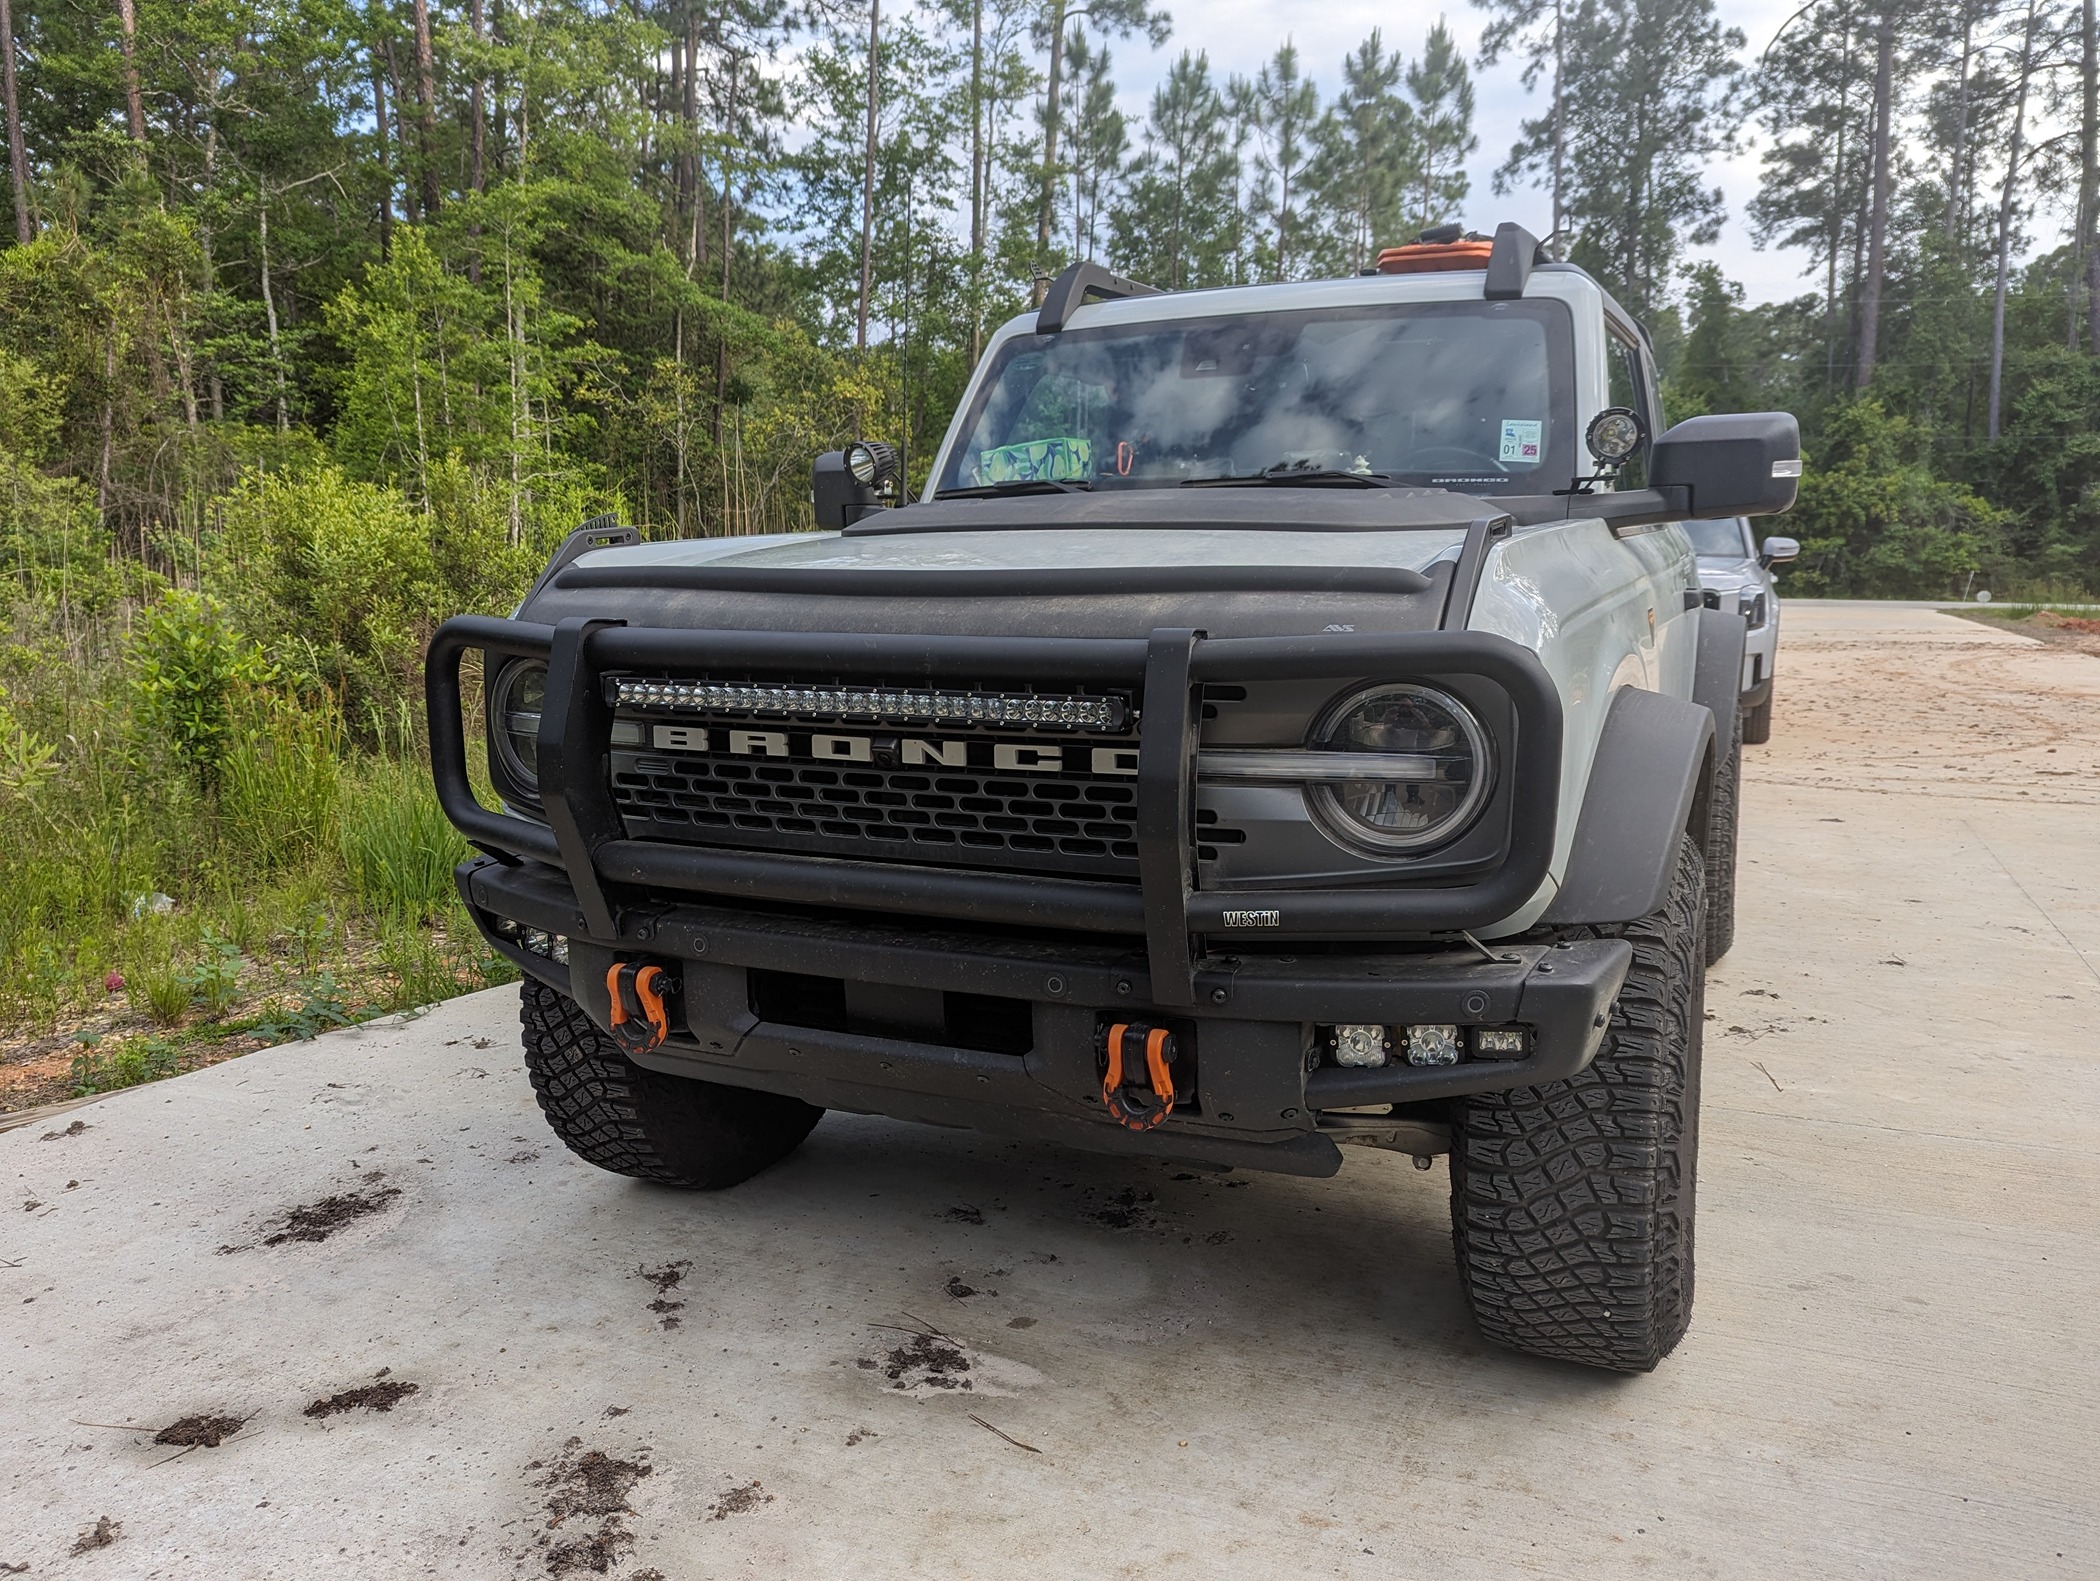 Ford Bronco Front End Friday! Show off your Bronco! PXL_20240503_233003590